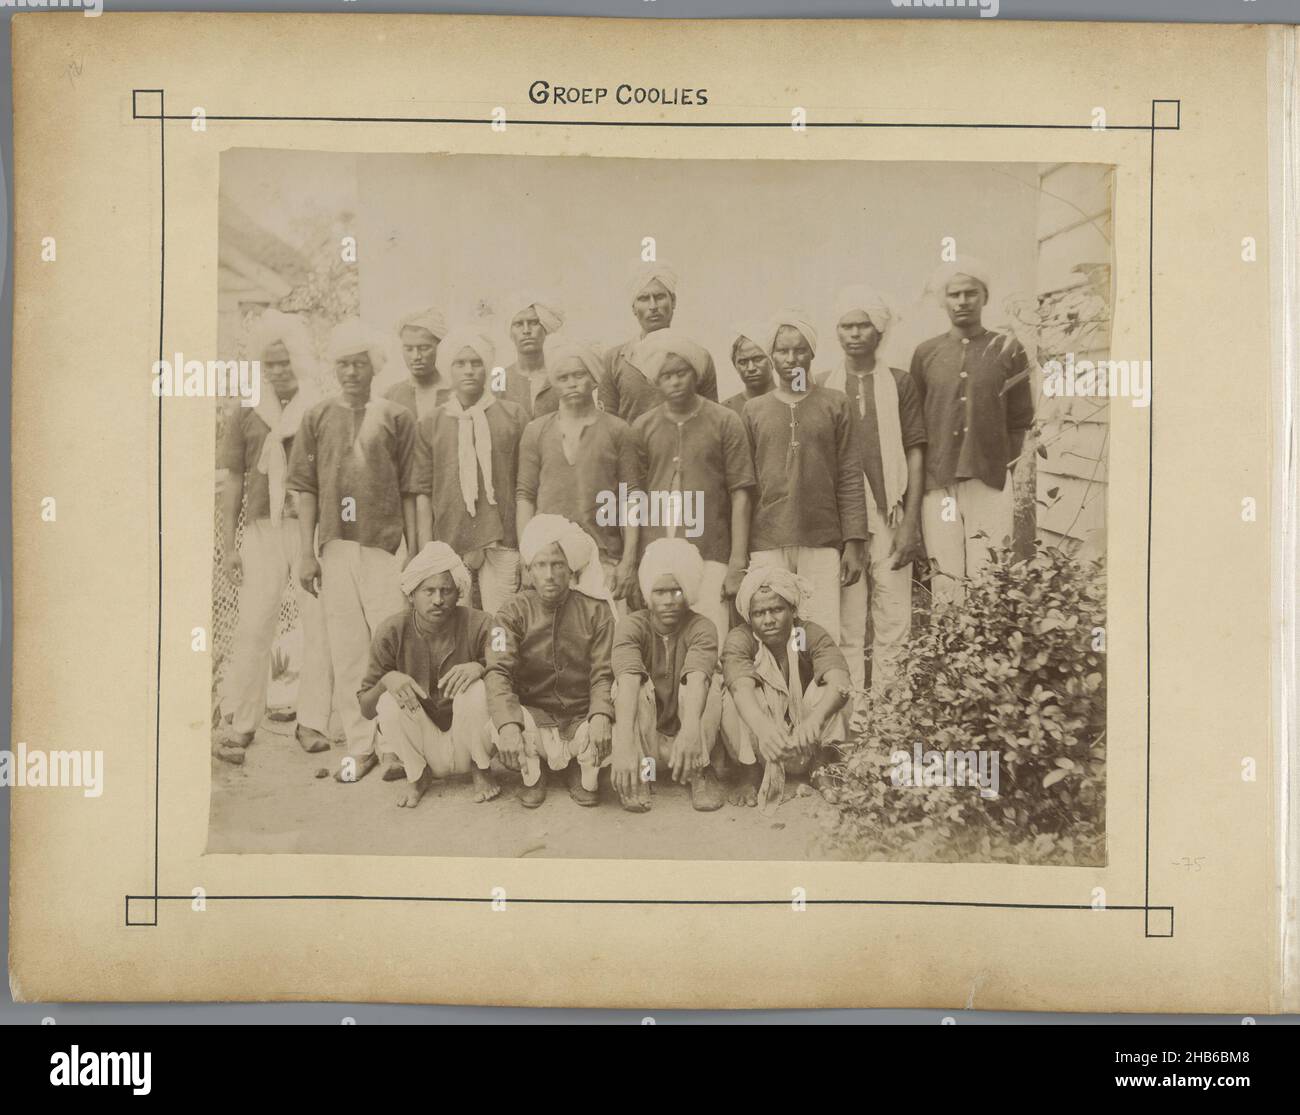 Group of Hindustani contract workers, Group of Coolies (title on object), Group of contract workers from British India., Julius Muller, C.J. Chapman, Suriname, 1898 - 1902, albumen print, height 212 mm × width 268 mm × height 297 mm × width 437 mm Stock Photo